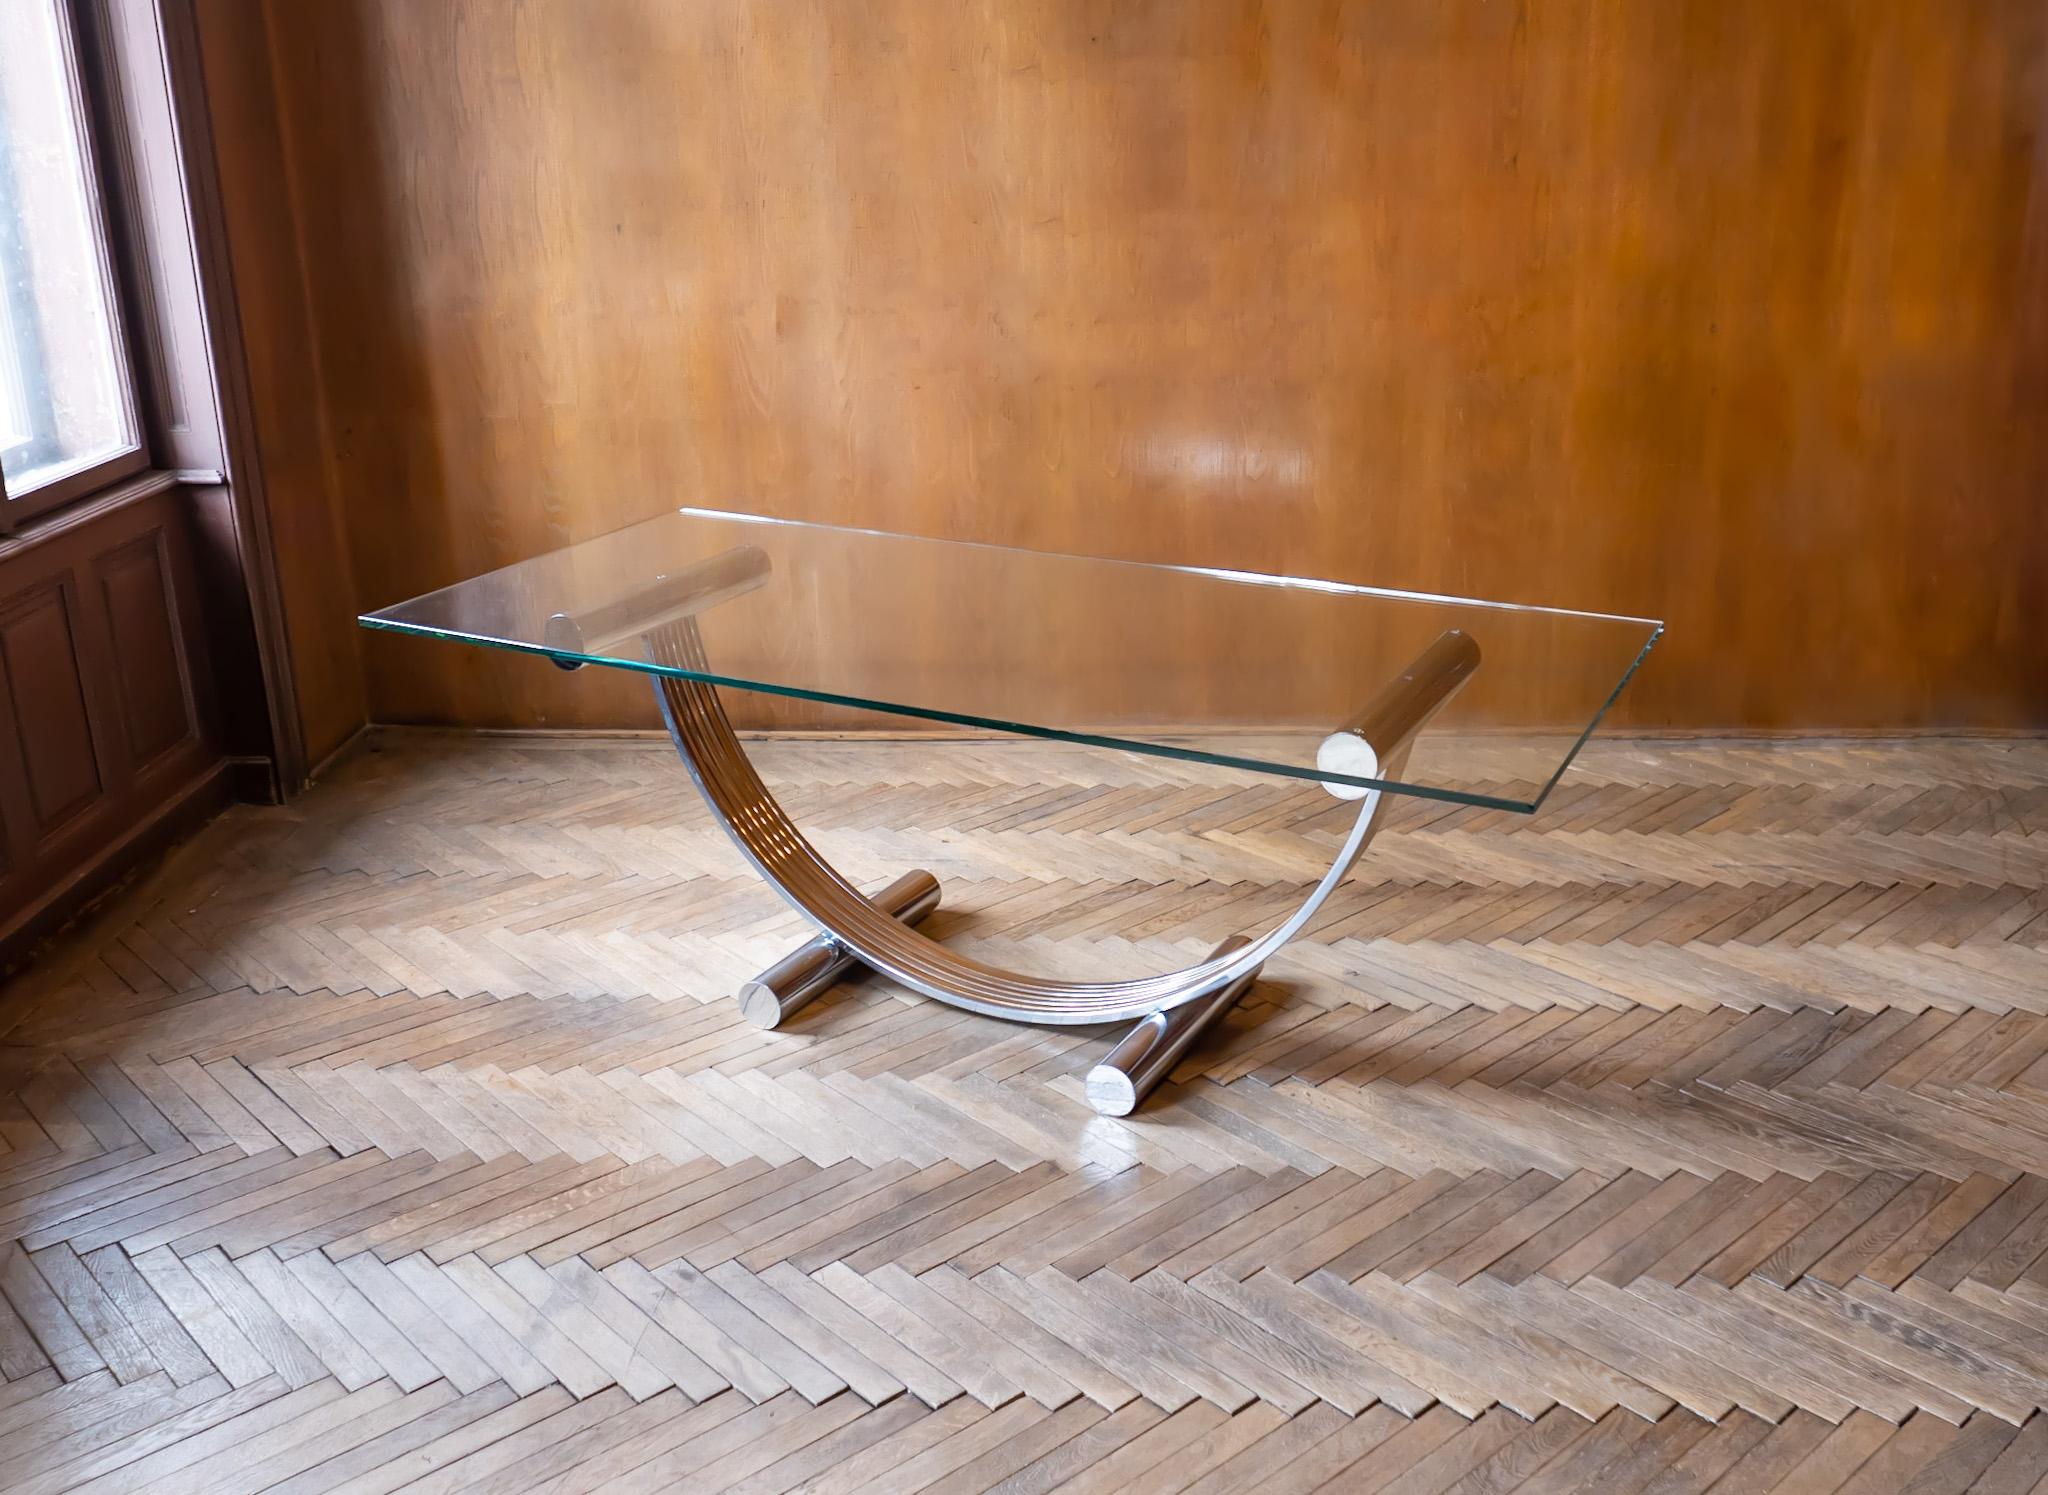 Hollywood Regency Brass Chrome Glass Dining Table by Renato Zevi for Banci Firenze, Italy 1970s.

Extraordinary dining or center table with a stunning brass and chrome base in the style of Hollywood Regency was designed by Renato Zevi and produced